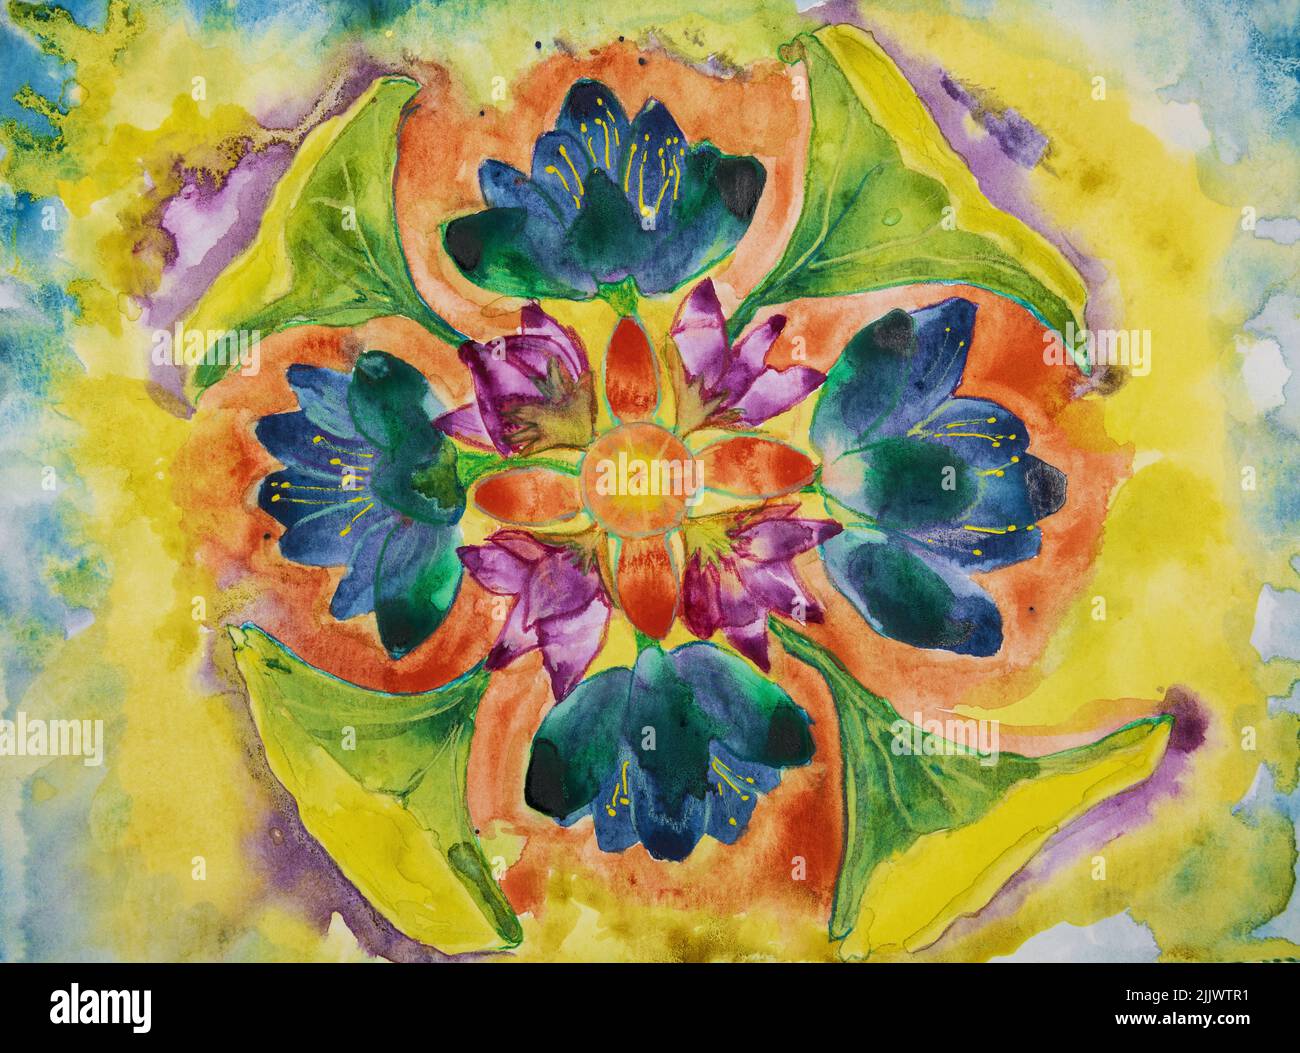 Mandala with lotus flowers and leaves. The dabbing technique near the edges gives a soft focus effect due to the altered surface roughness of the pape Stock Photo